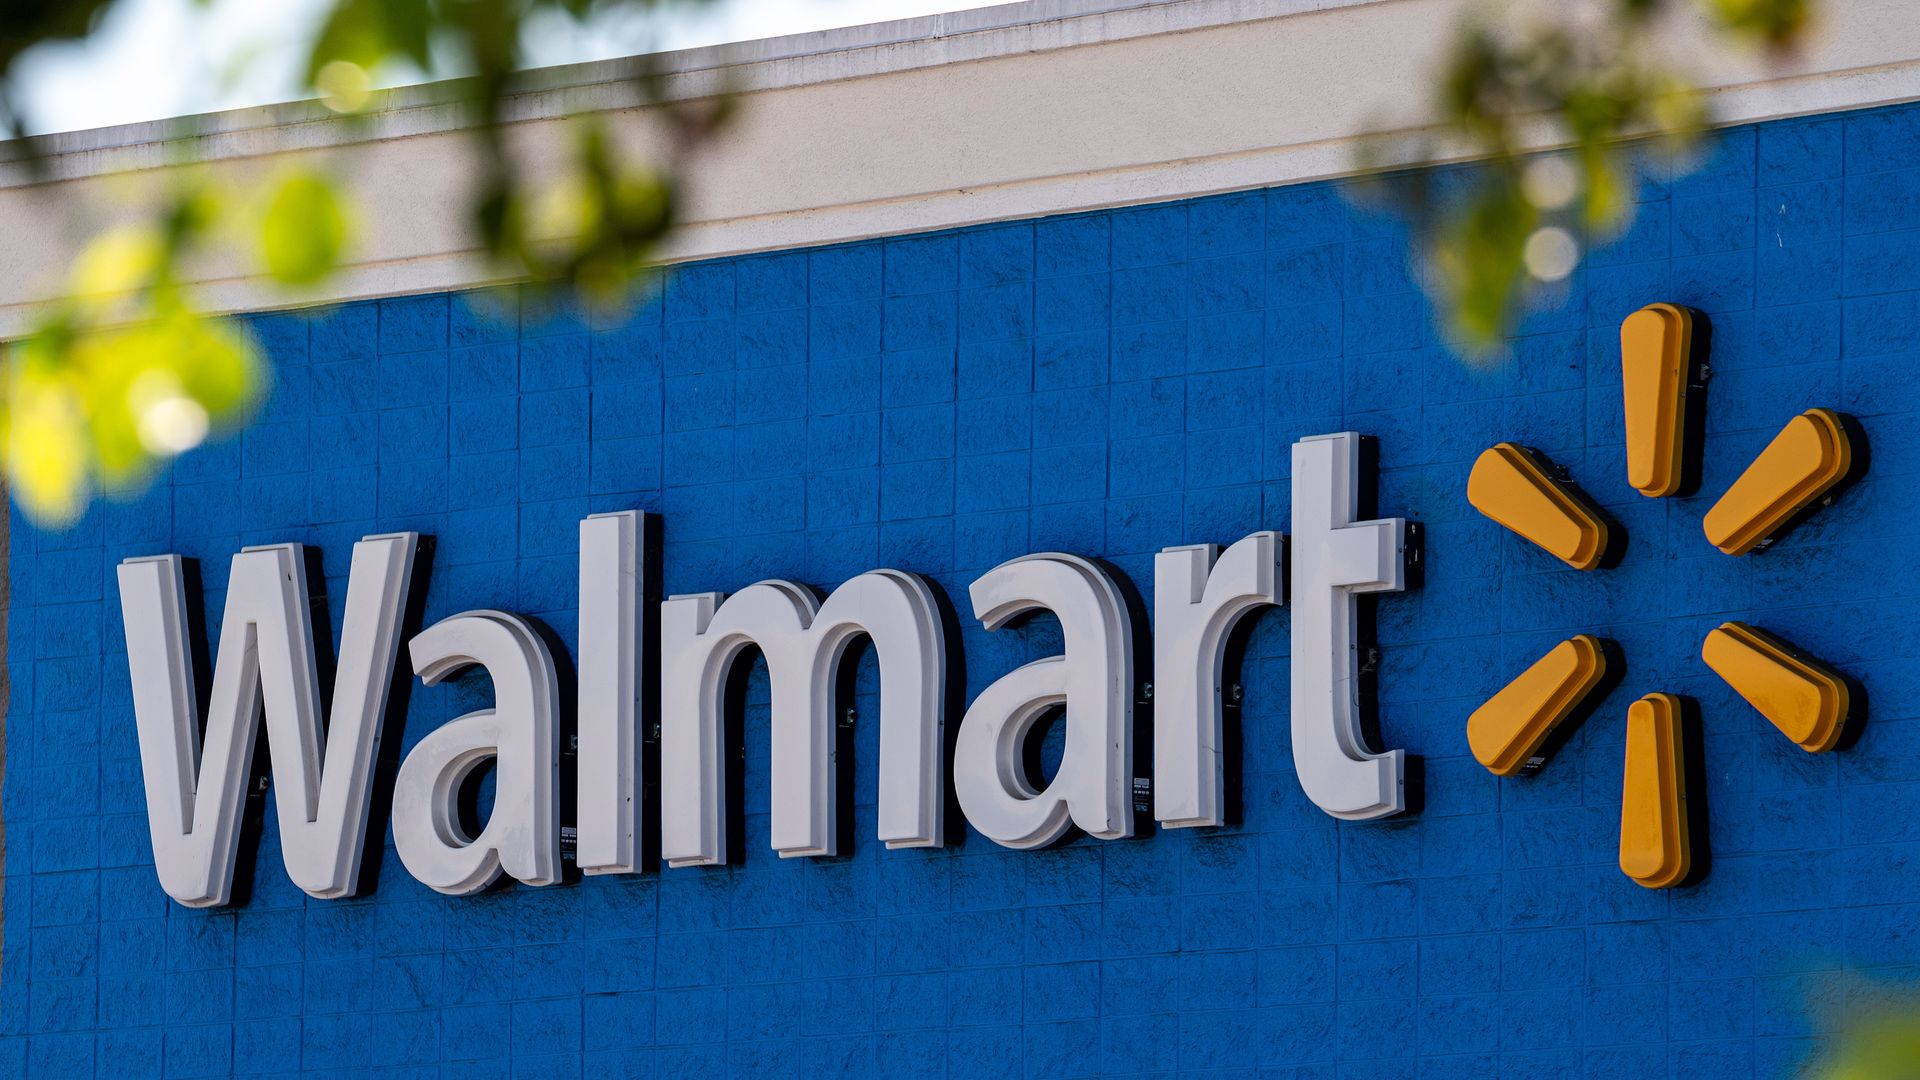 Walmart name on exterior of store with yellow logo